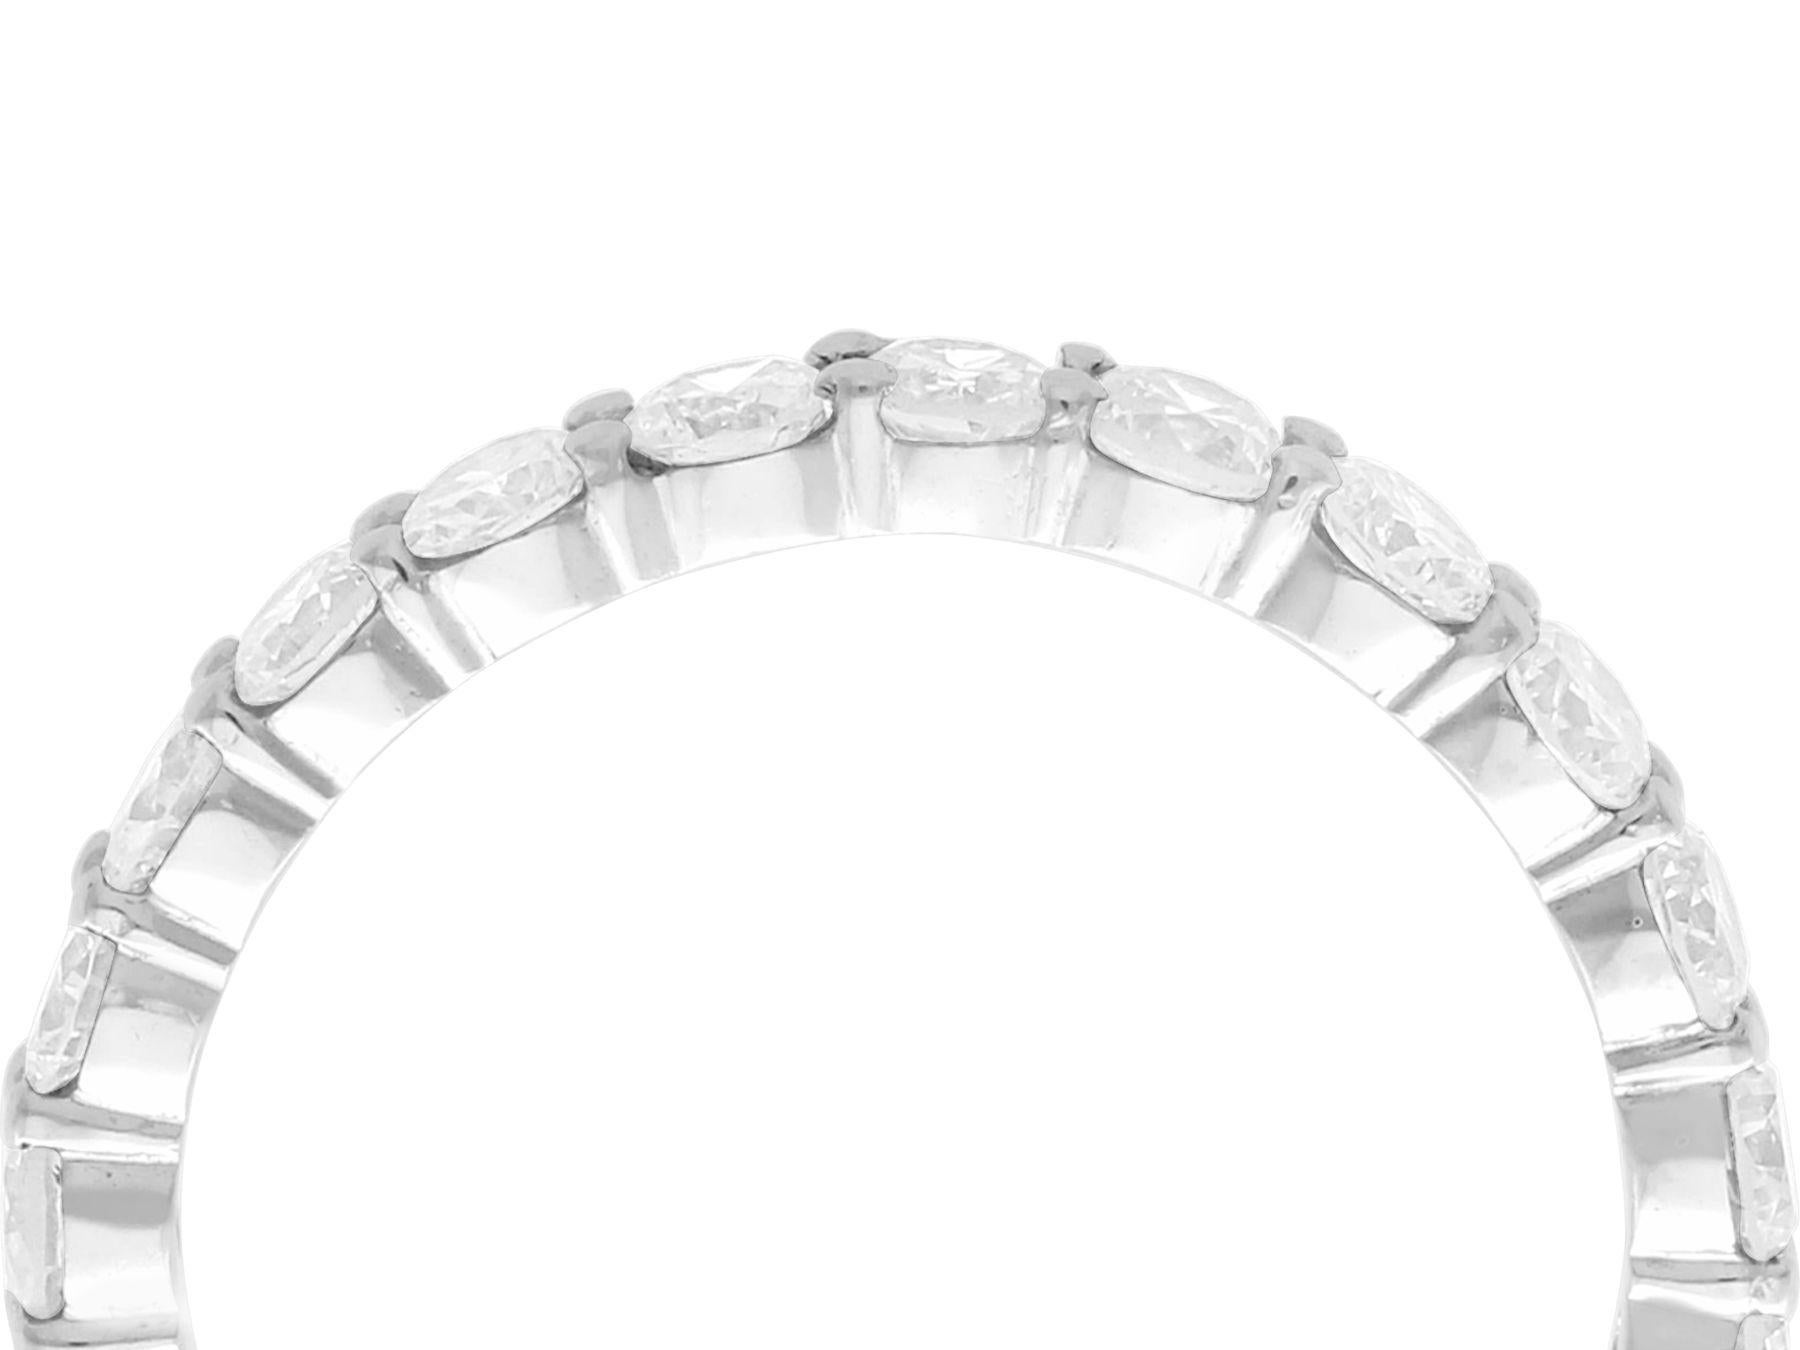 A fine and impressive vintage 1.84 carat diamond, 18 carat white gold full eternity ring; part of our vintage jewelry/estate jewelry collections.

This fine and impressive vintage eternity ring has been crafted in 18 ct white gold.

The fine 18 ct